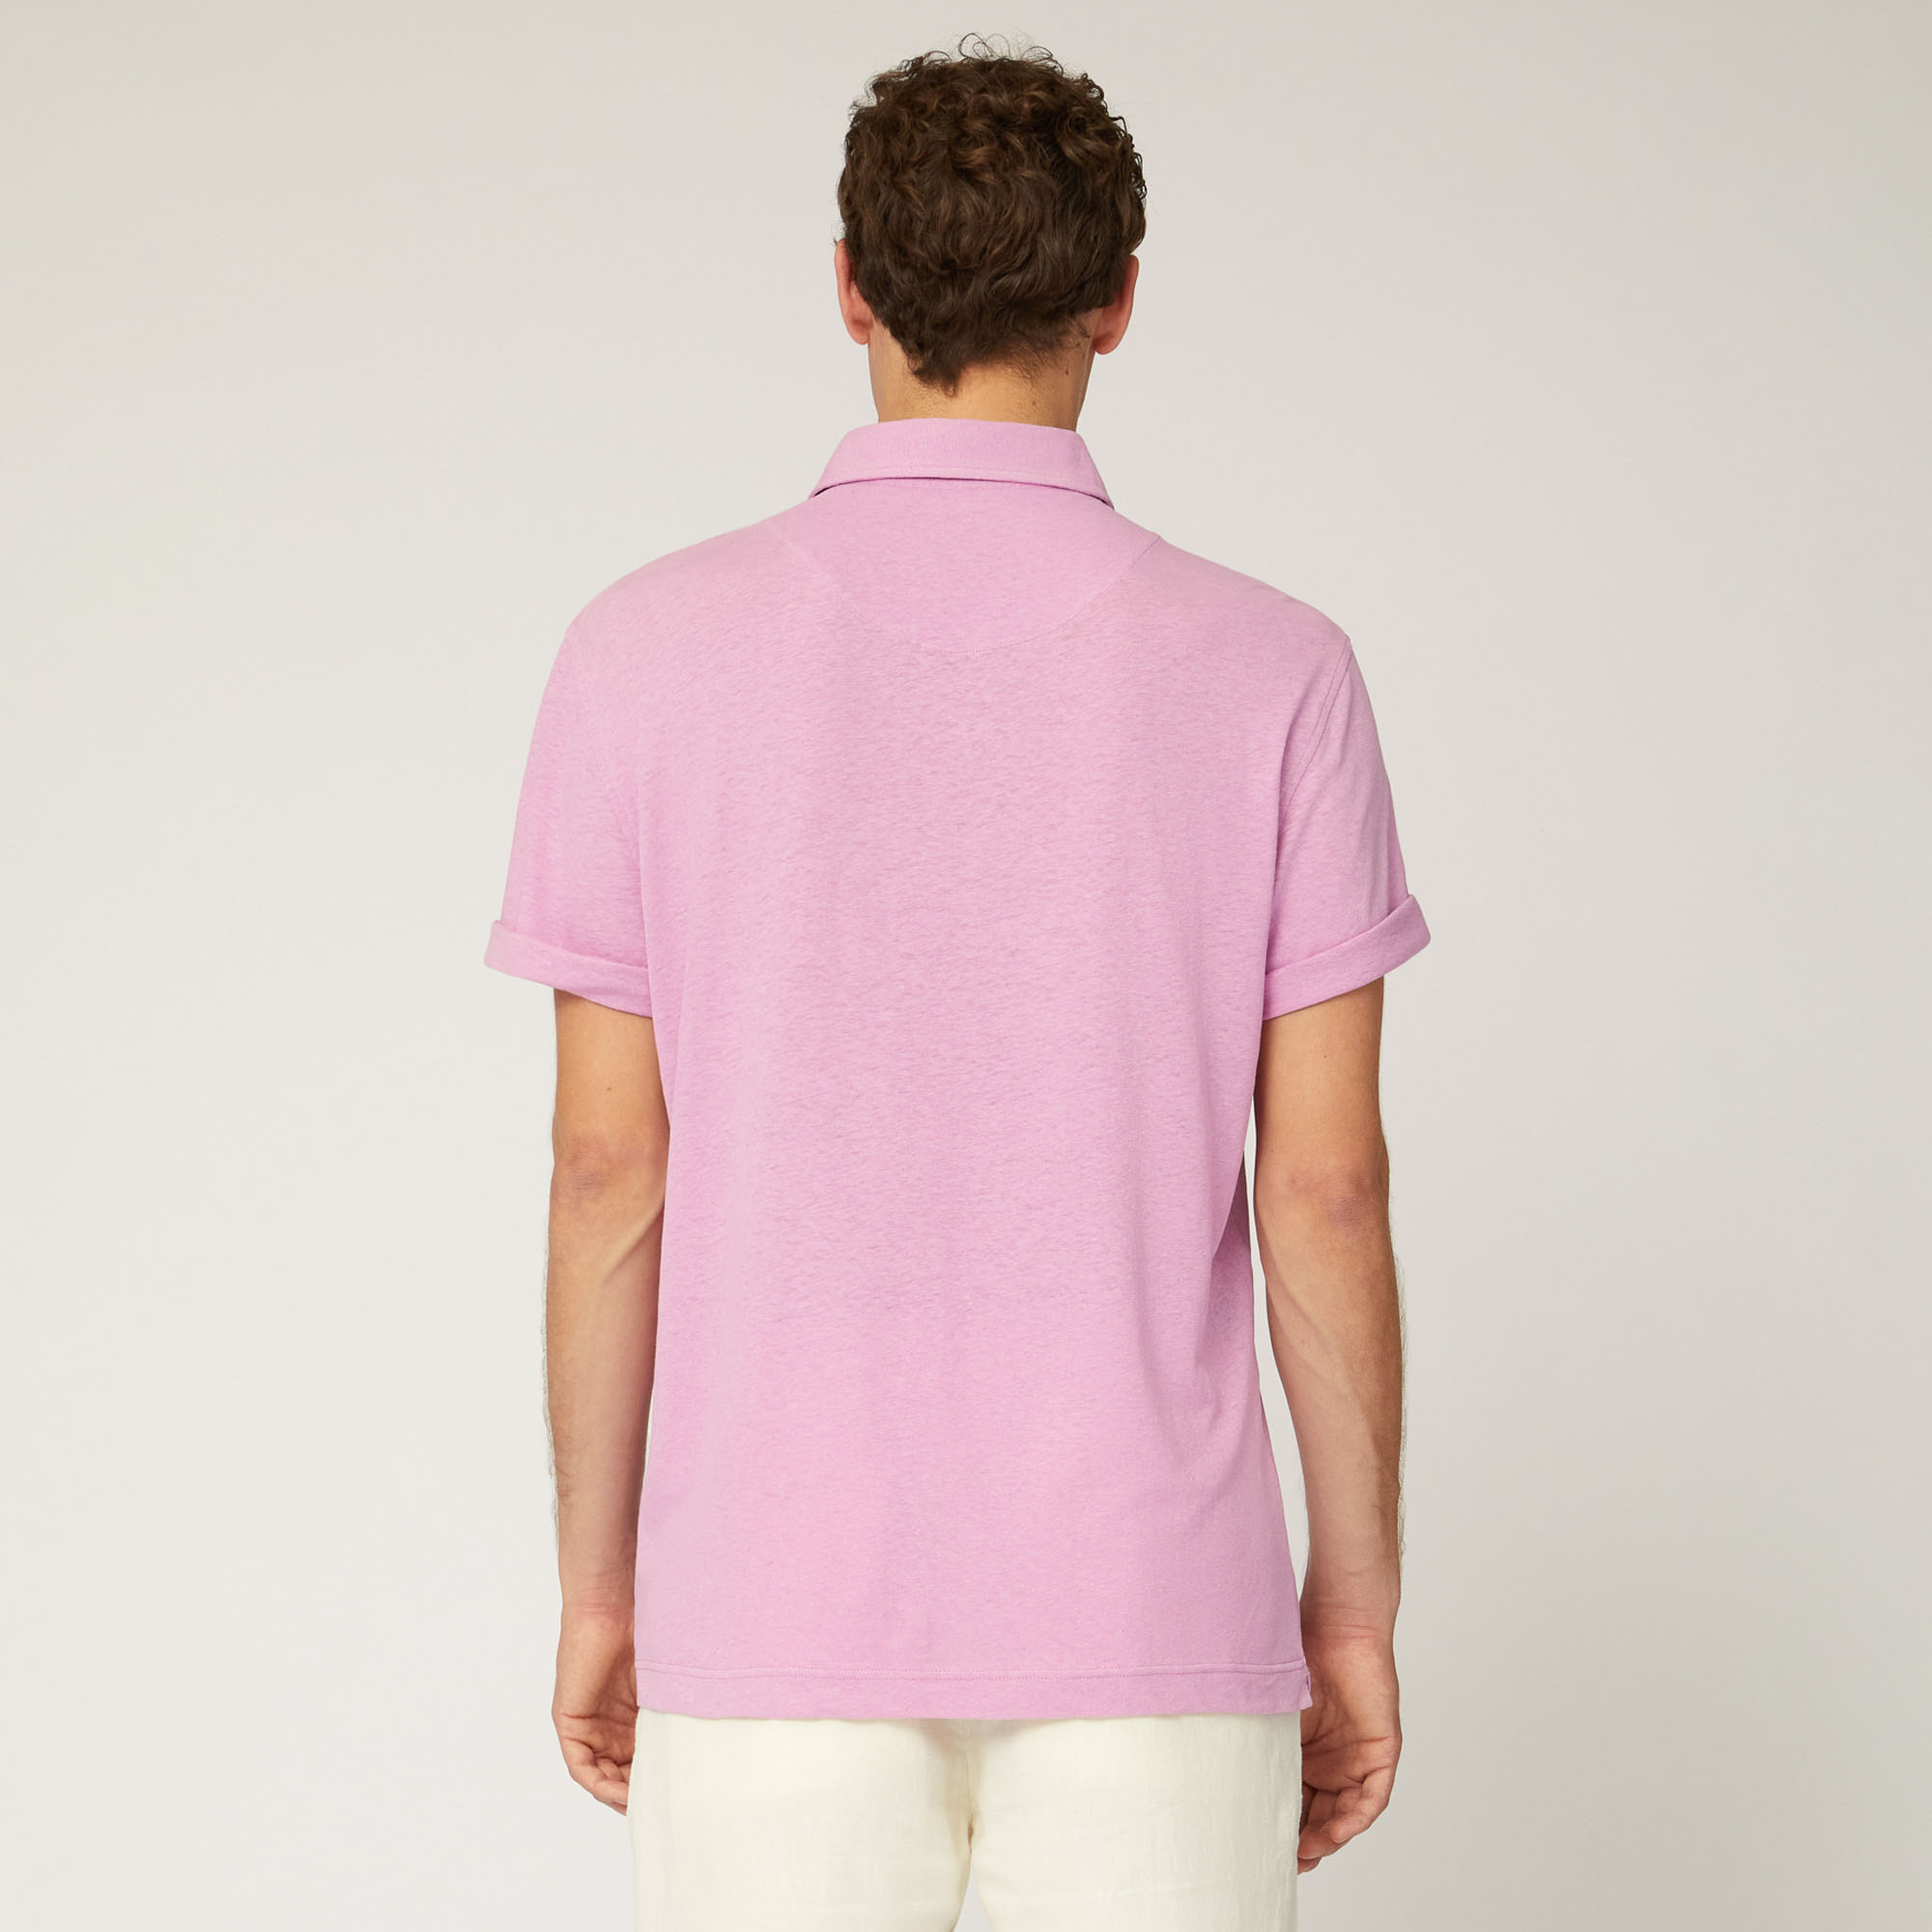 Cotton and Linen Jersey Polo